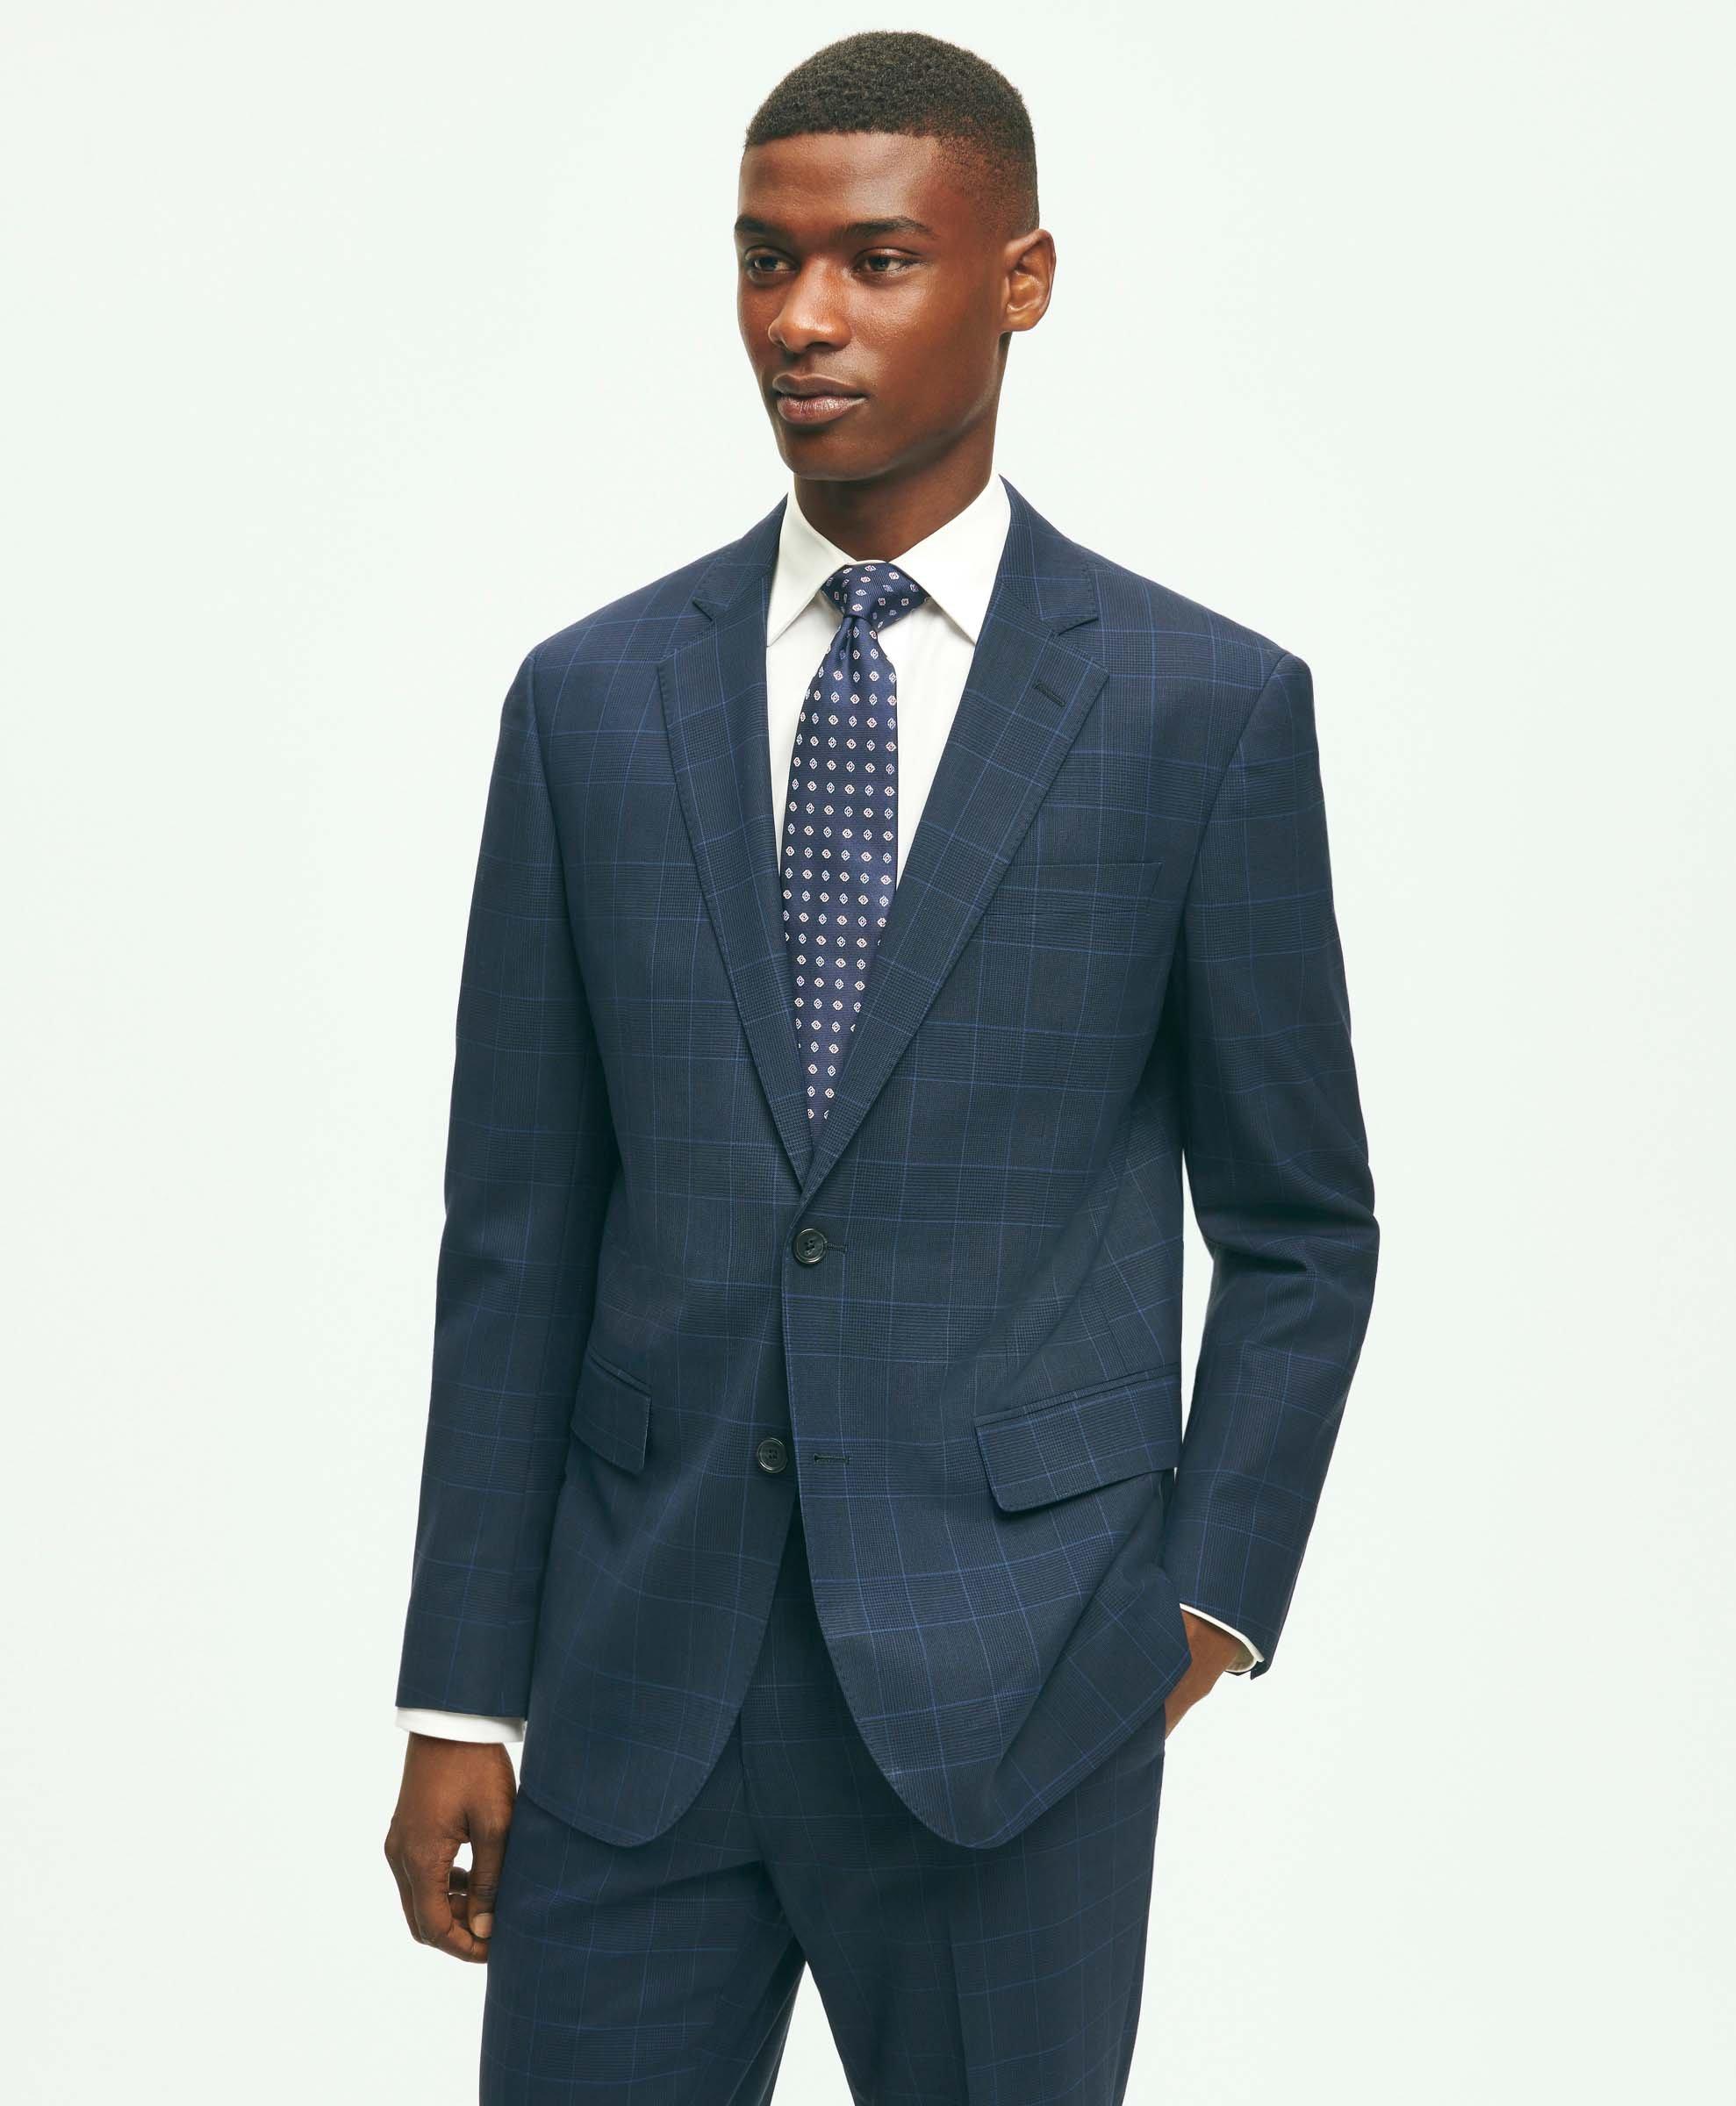 Skinny Check Suit Trousers